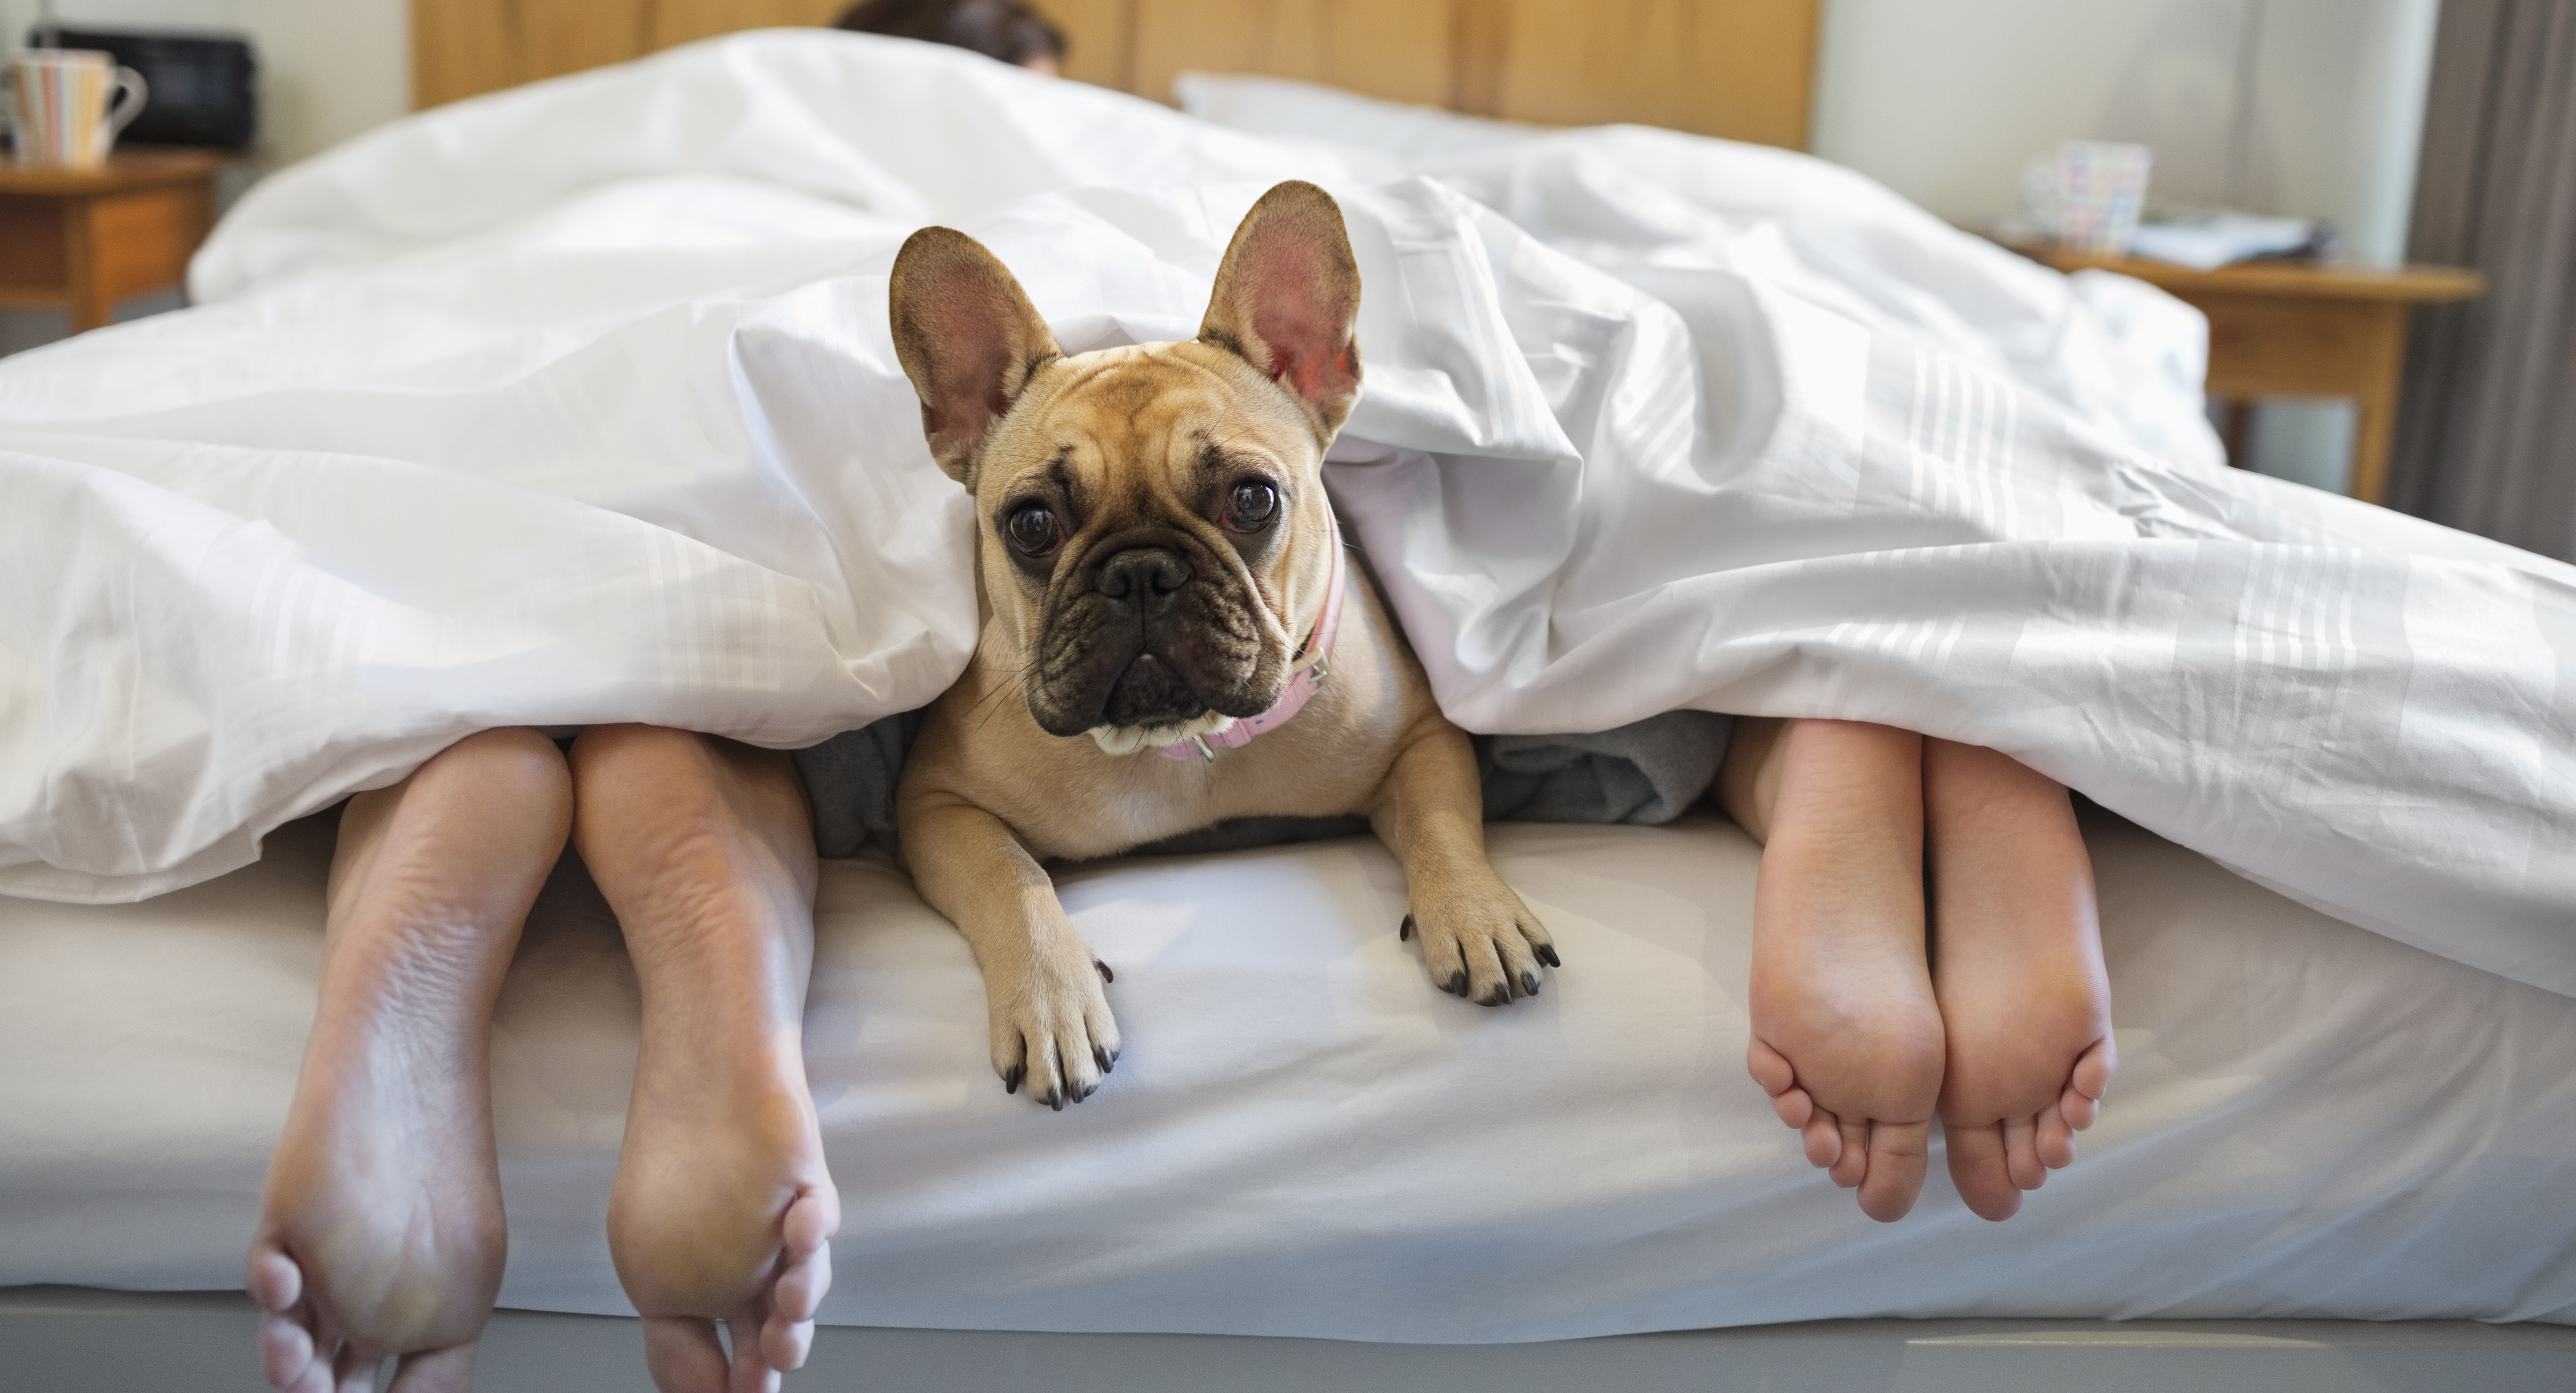 While two people sleep, a French bulldog peeks out from under the covers. | Source Getty Images